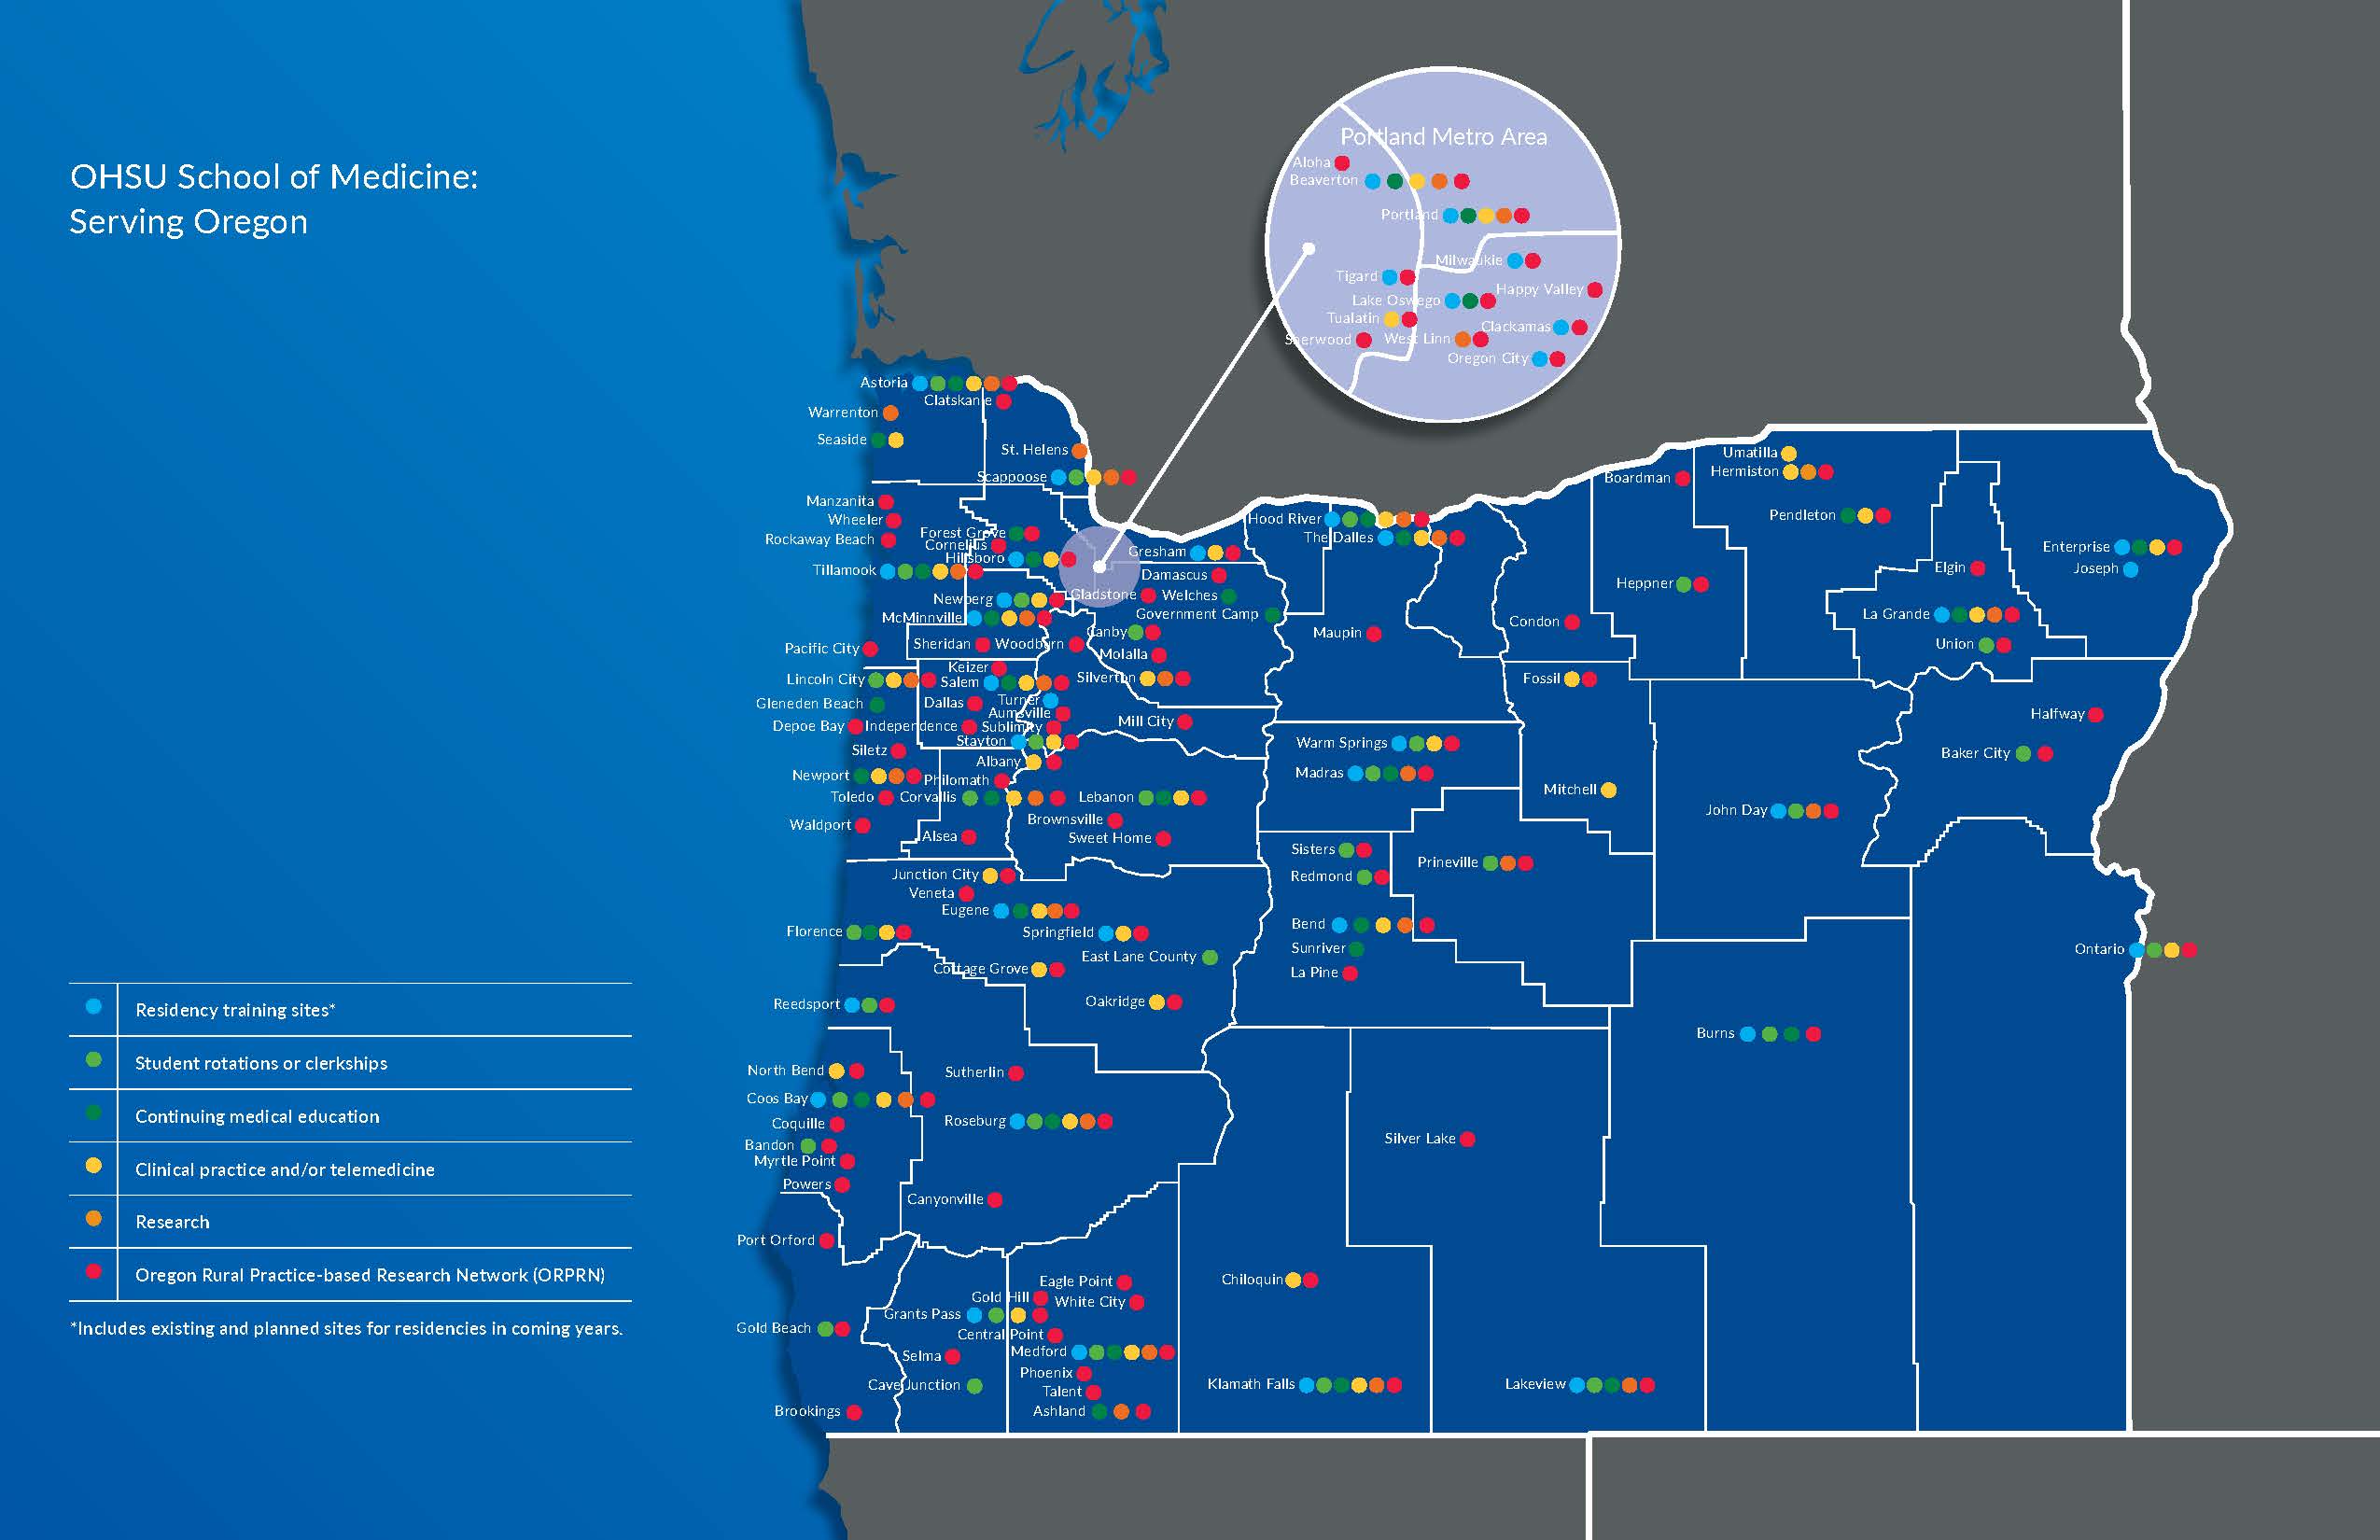 School of Medicine - statewide reach in serving all Oregonians, updated February 2019